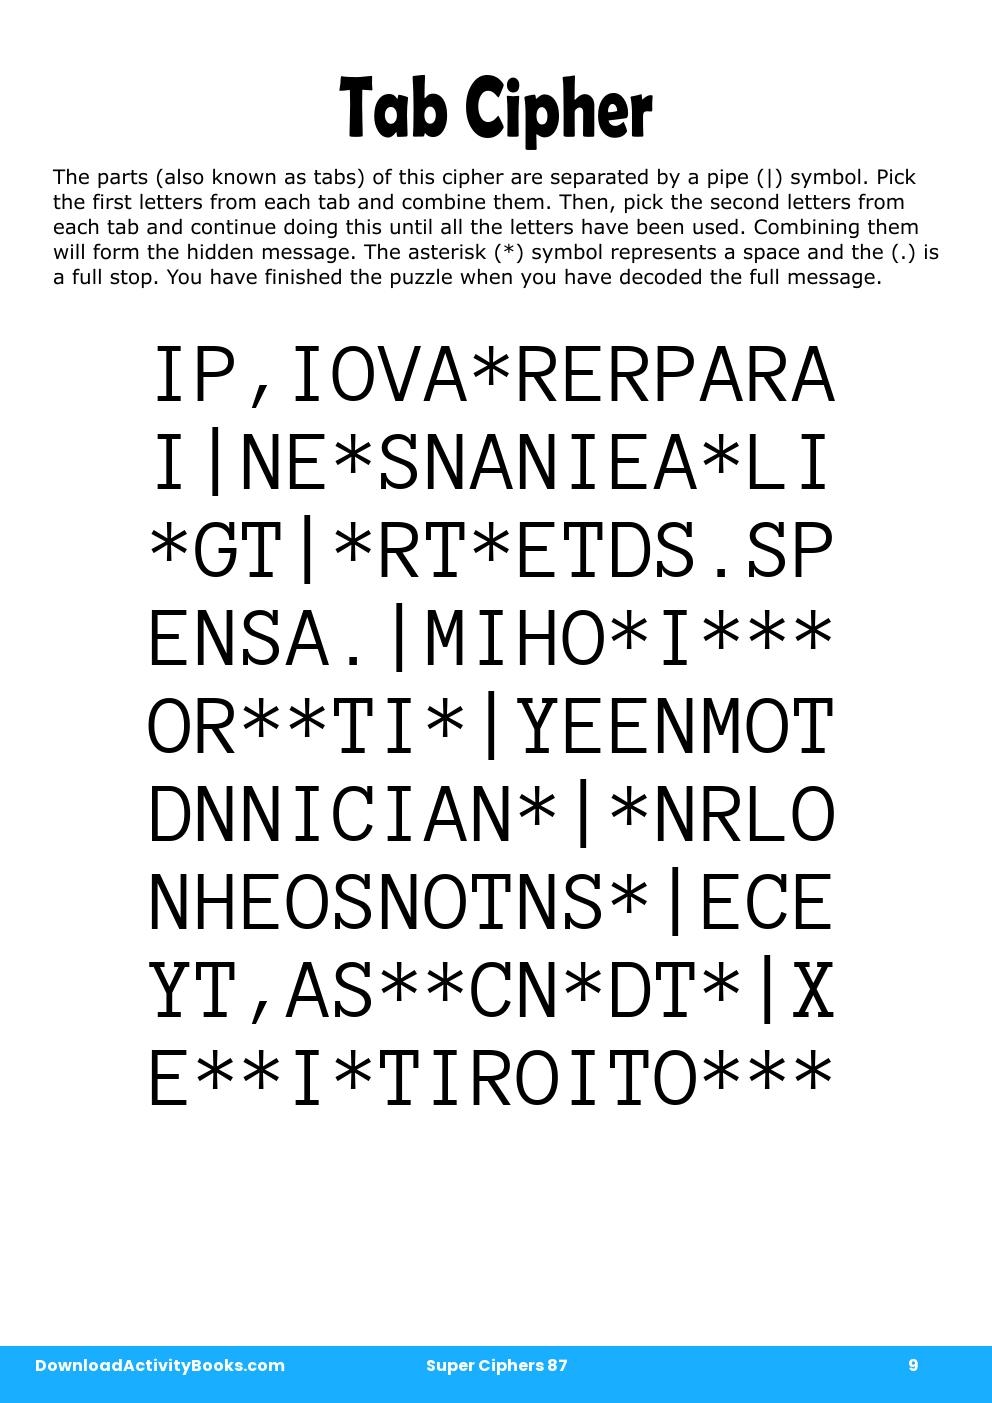 Tab Cipher in Super Ciphers 87